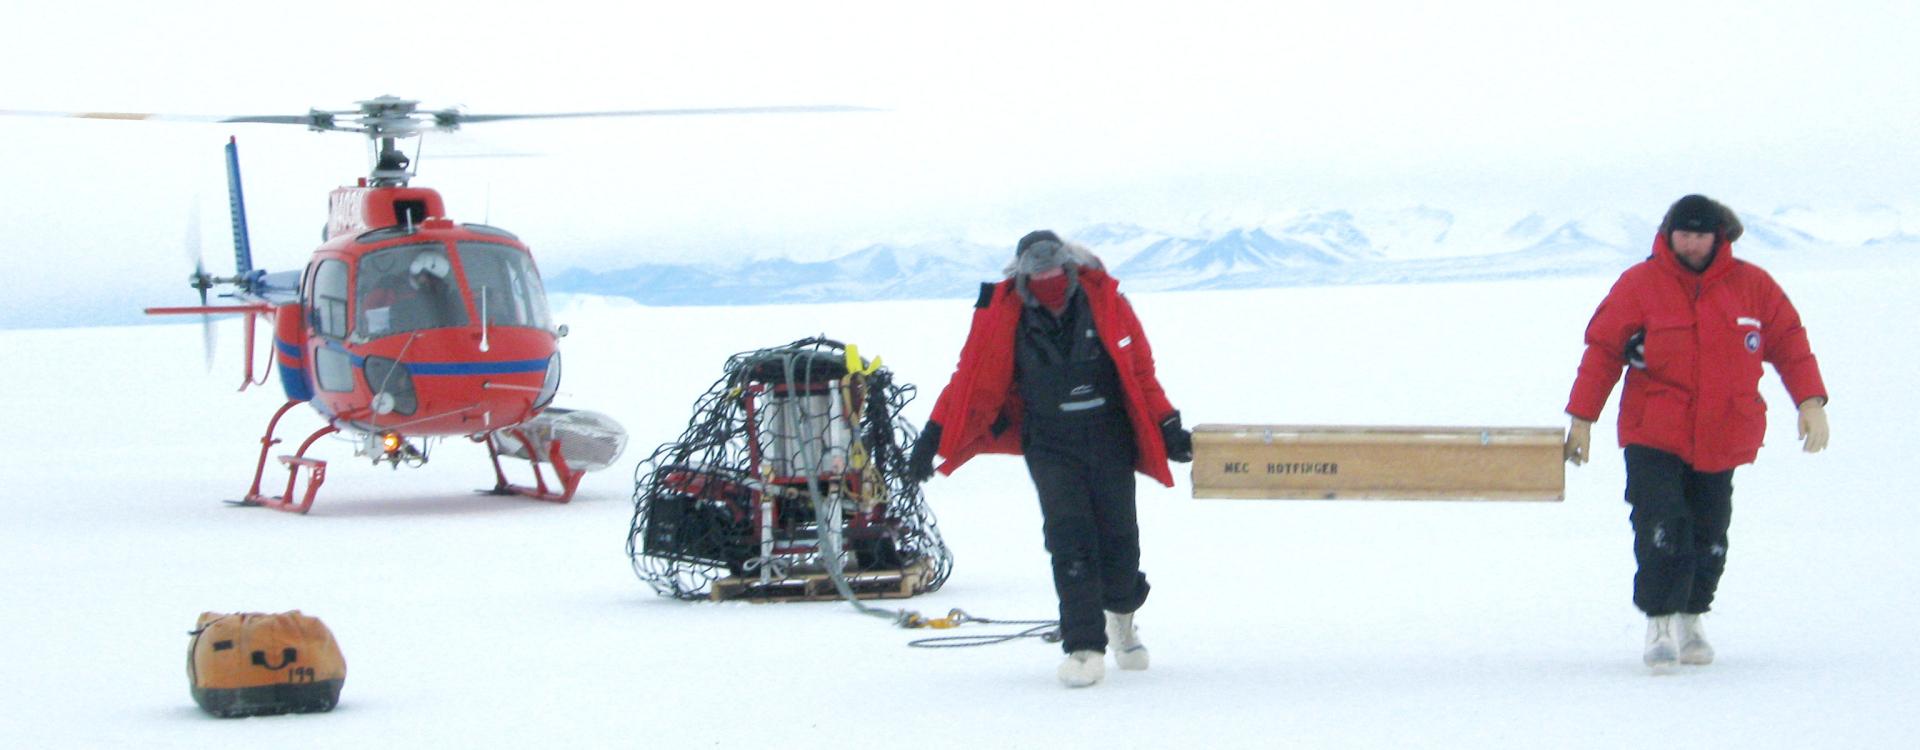 Two researchers just got out an helicopter landed on ice of Antarctica